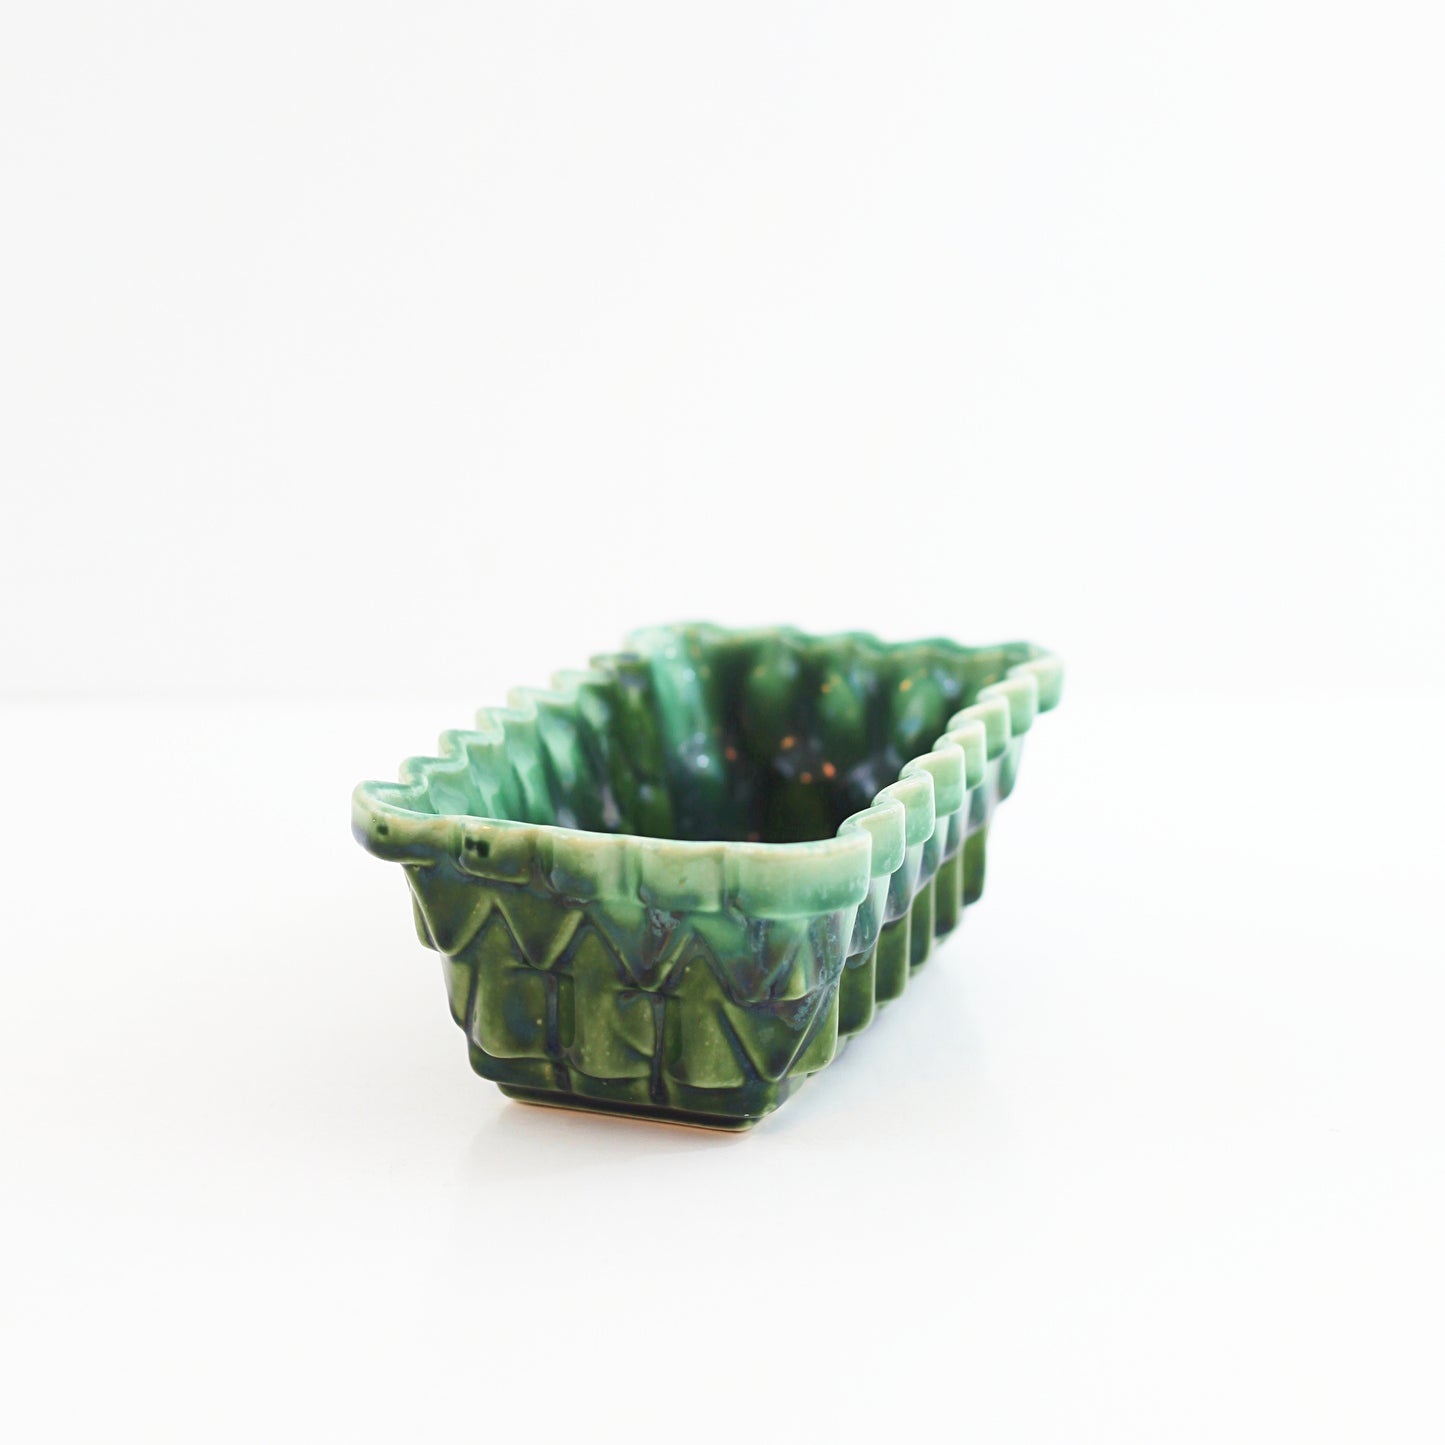 SOLD - Vintage Green Ombre Upco Planter